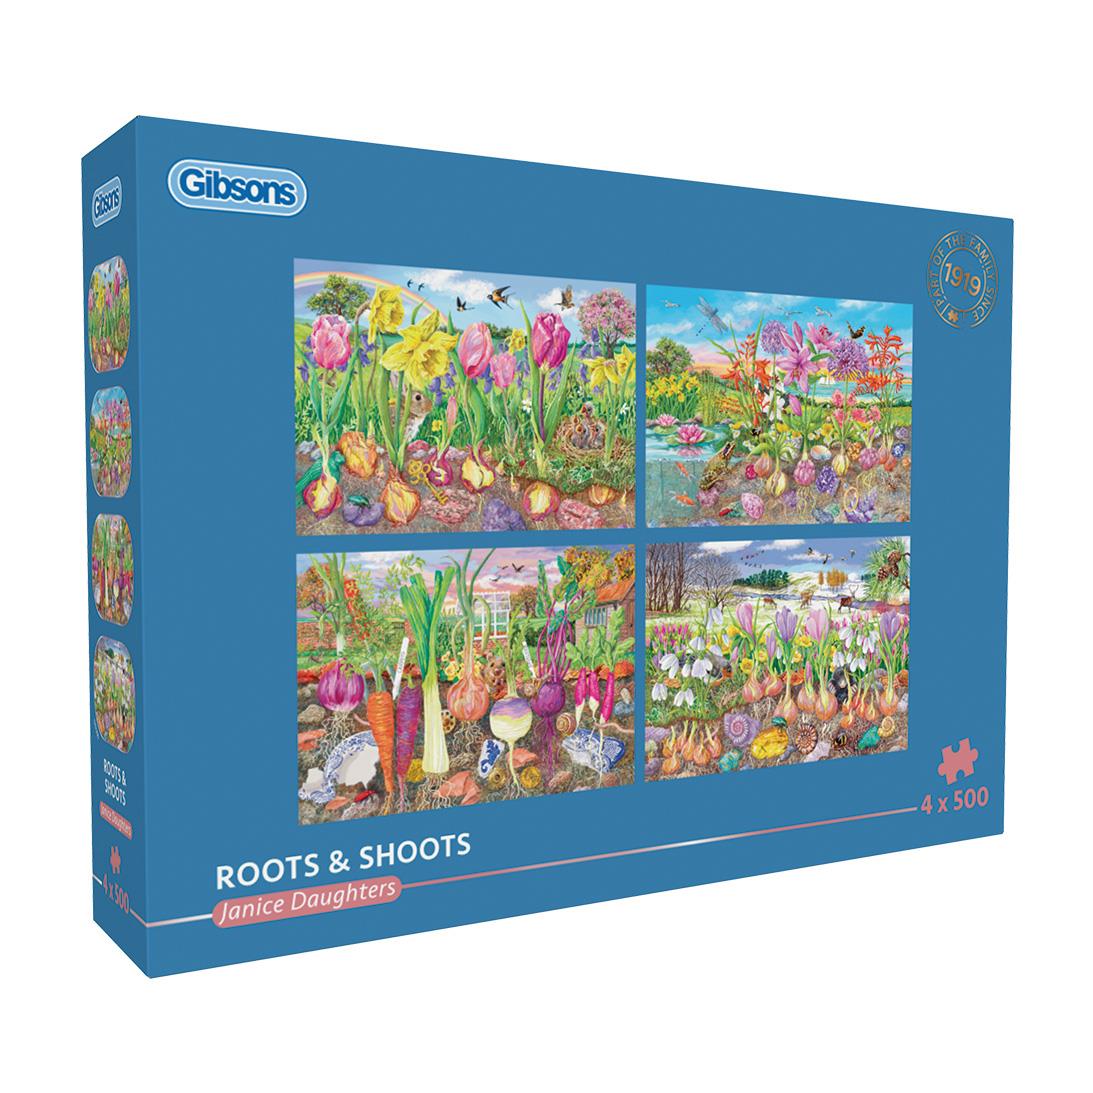 Roots & Shoots 4 x 500 Piece Jigsaw Puzzle